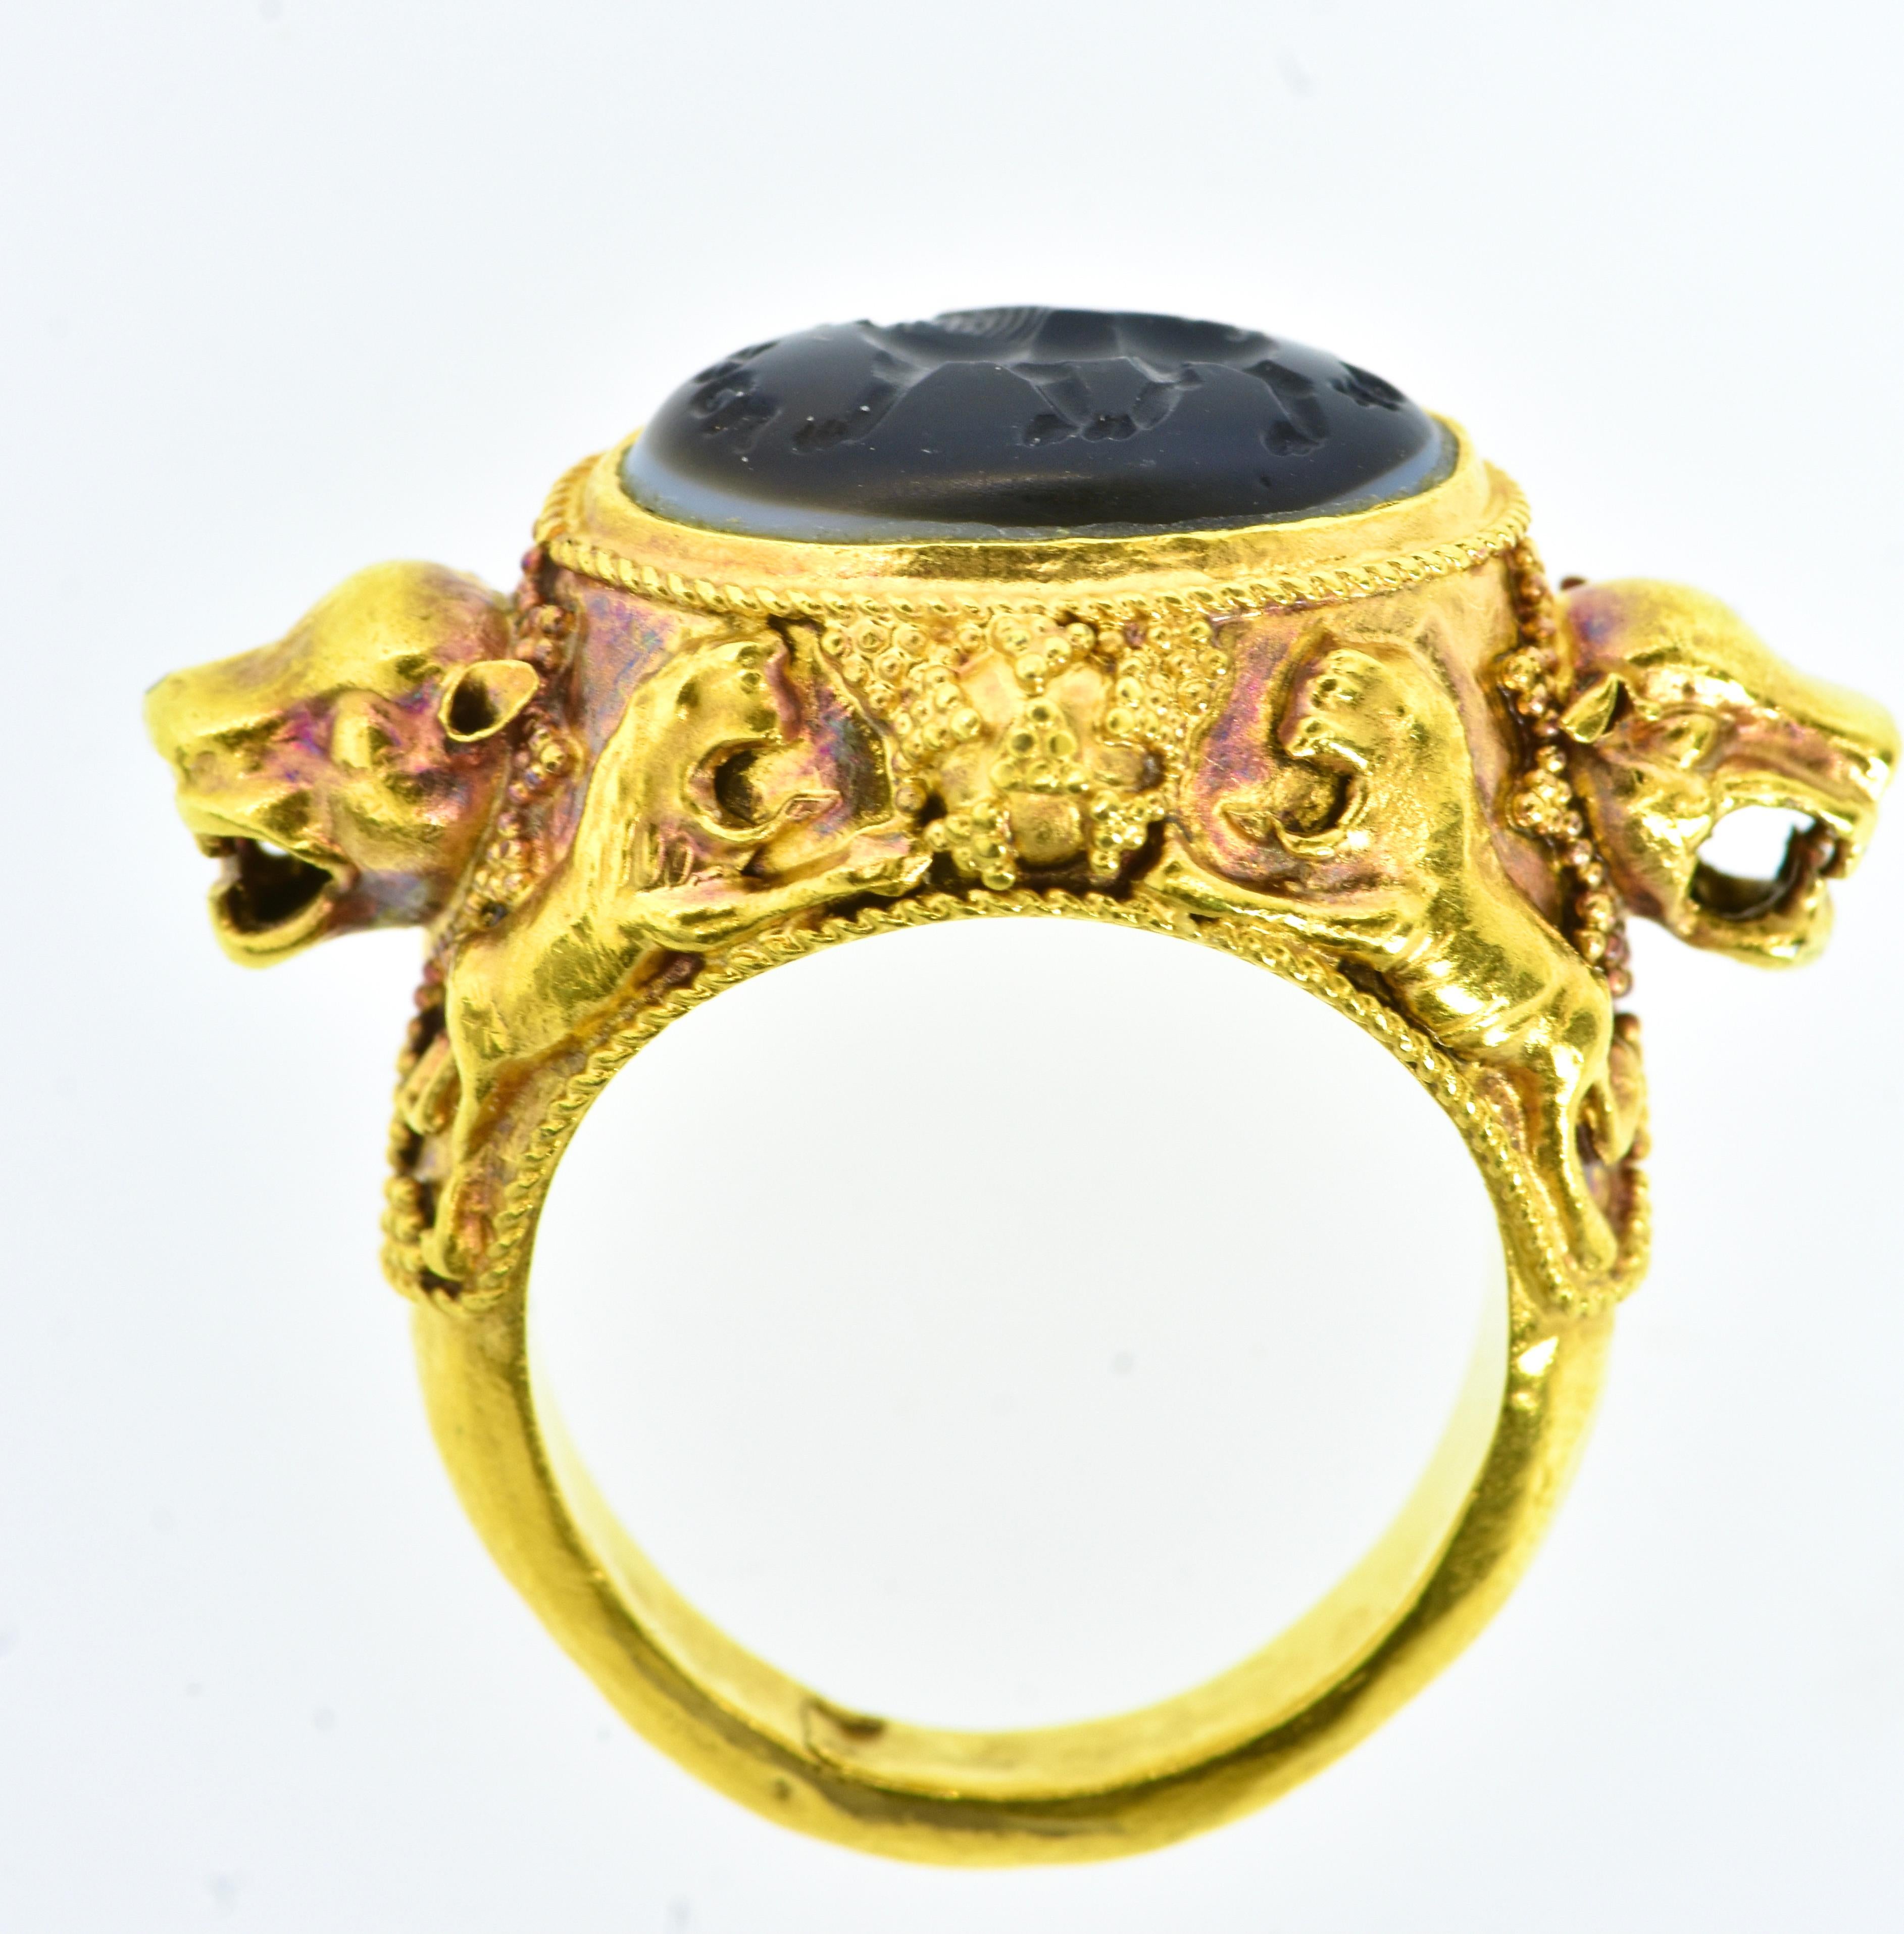 Antique Banded Agate Intaglio Within a Rare 22k Ring, C. 1800 5